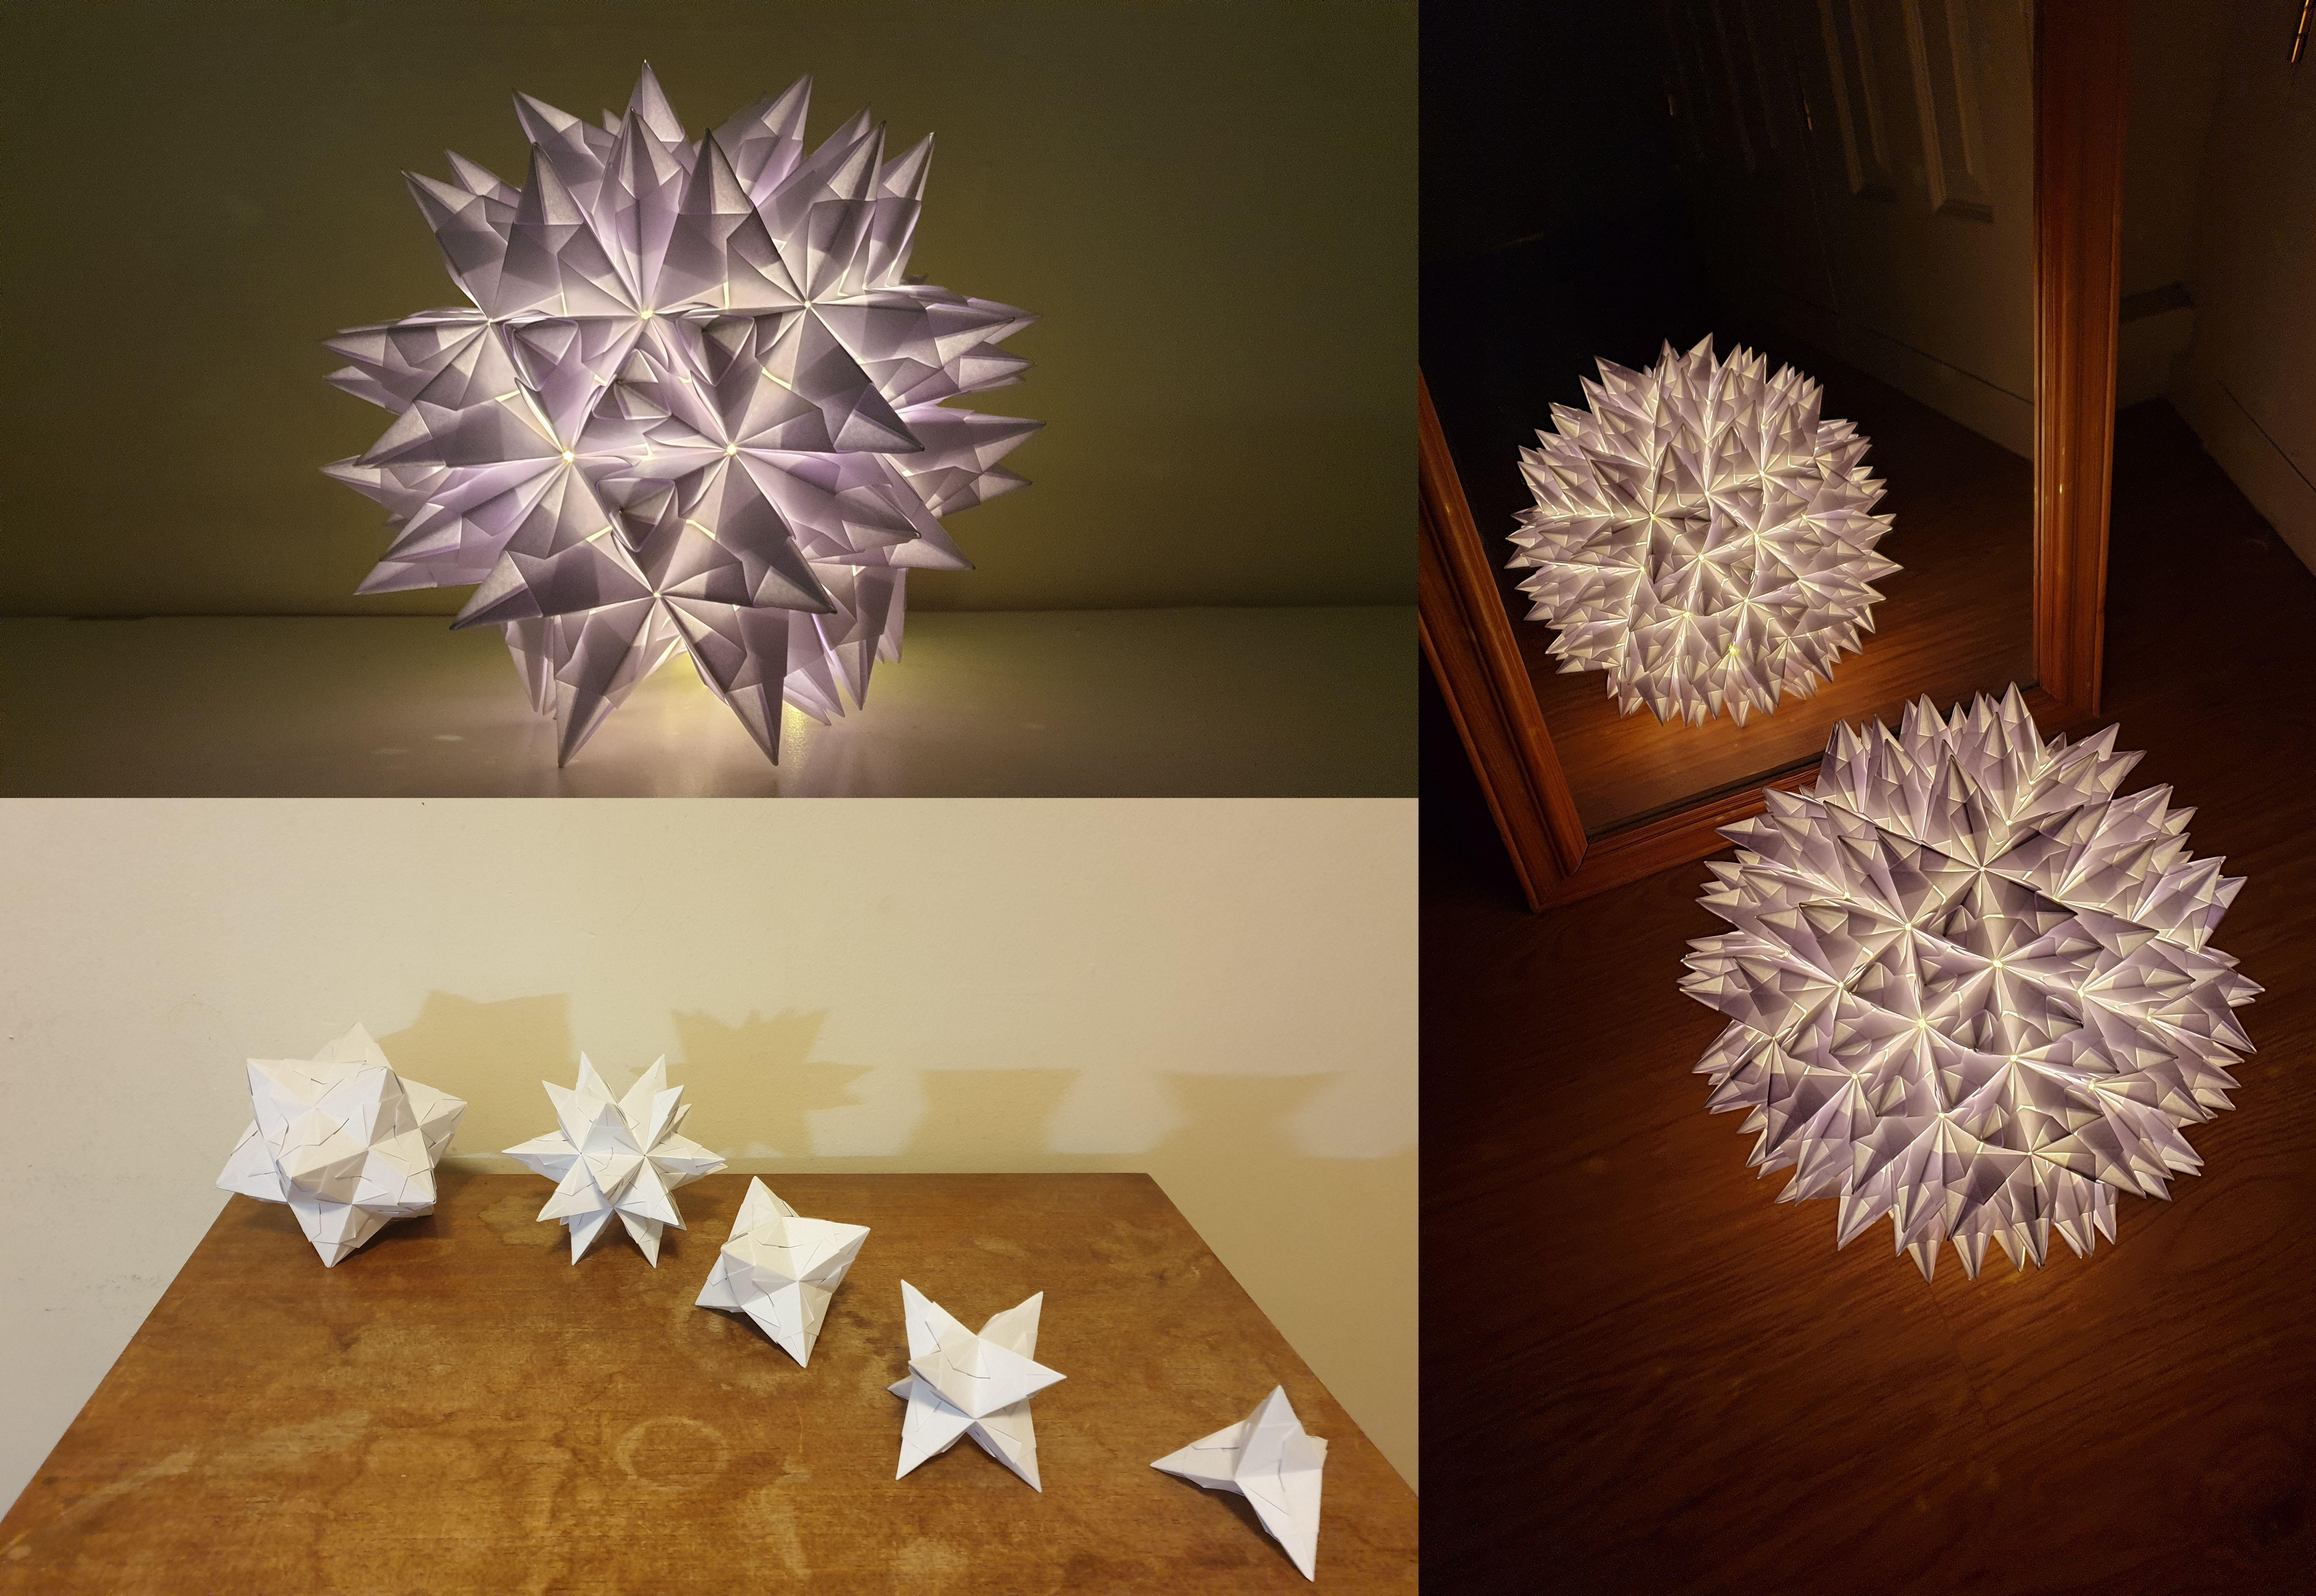 Image showing different models of a bascetta star starting from different platonic solid bases.